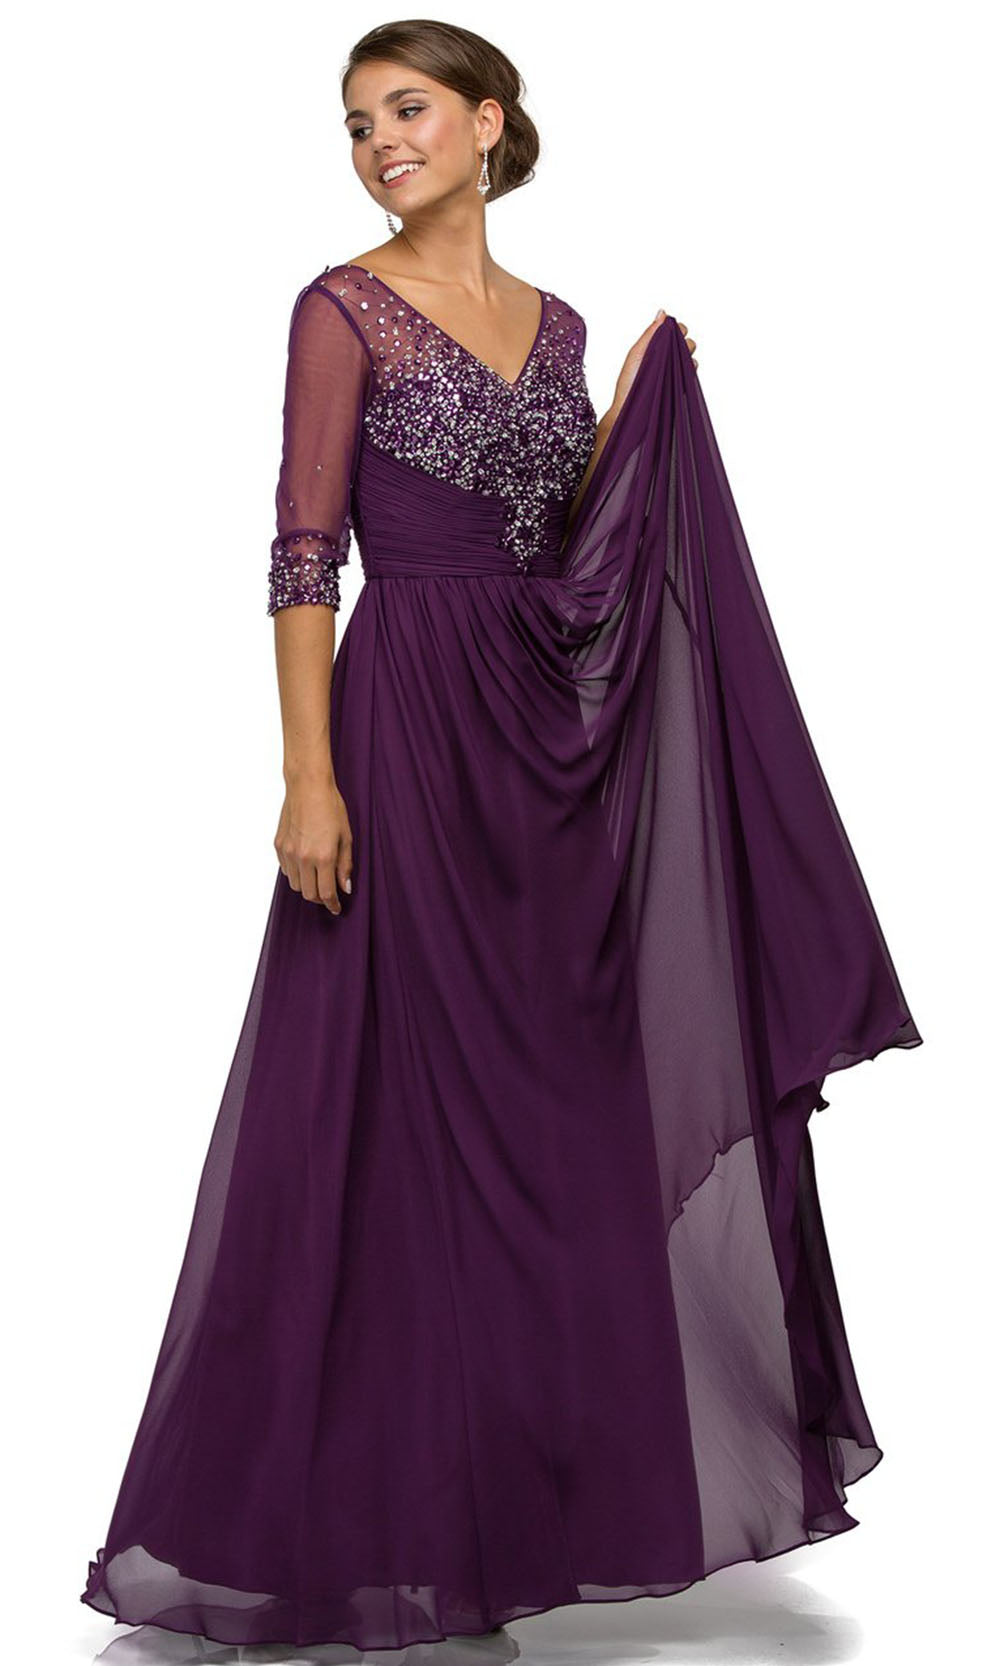 Plum Dancing Queen - 8855 V-Neck Beaded Bodice Sheer Sleeve A-Line Gown ...